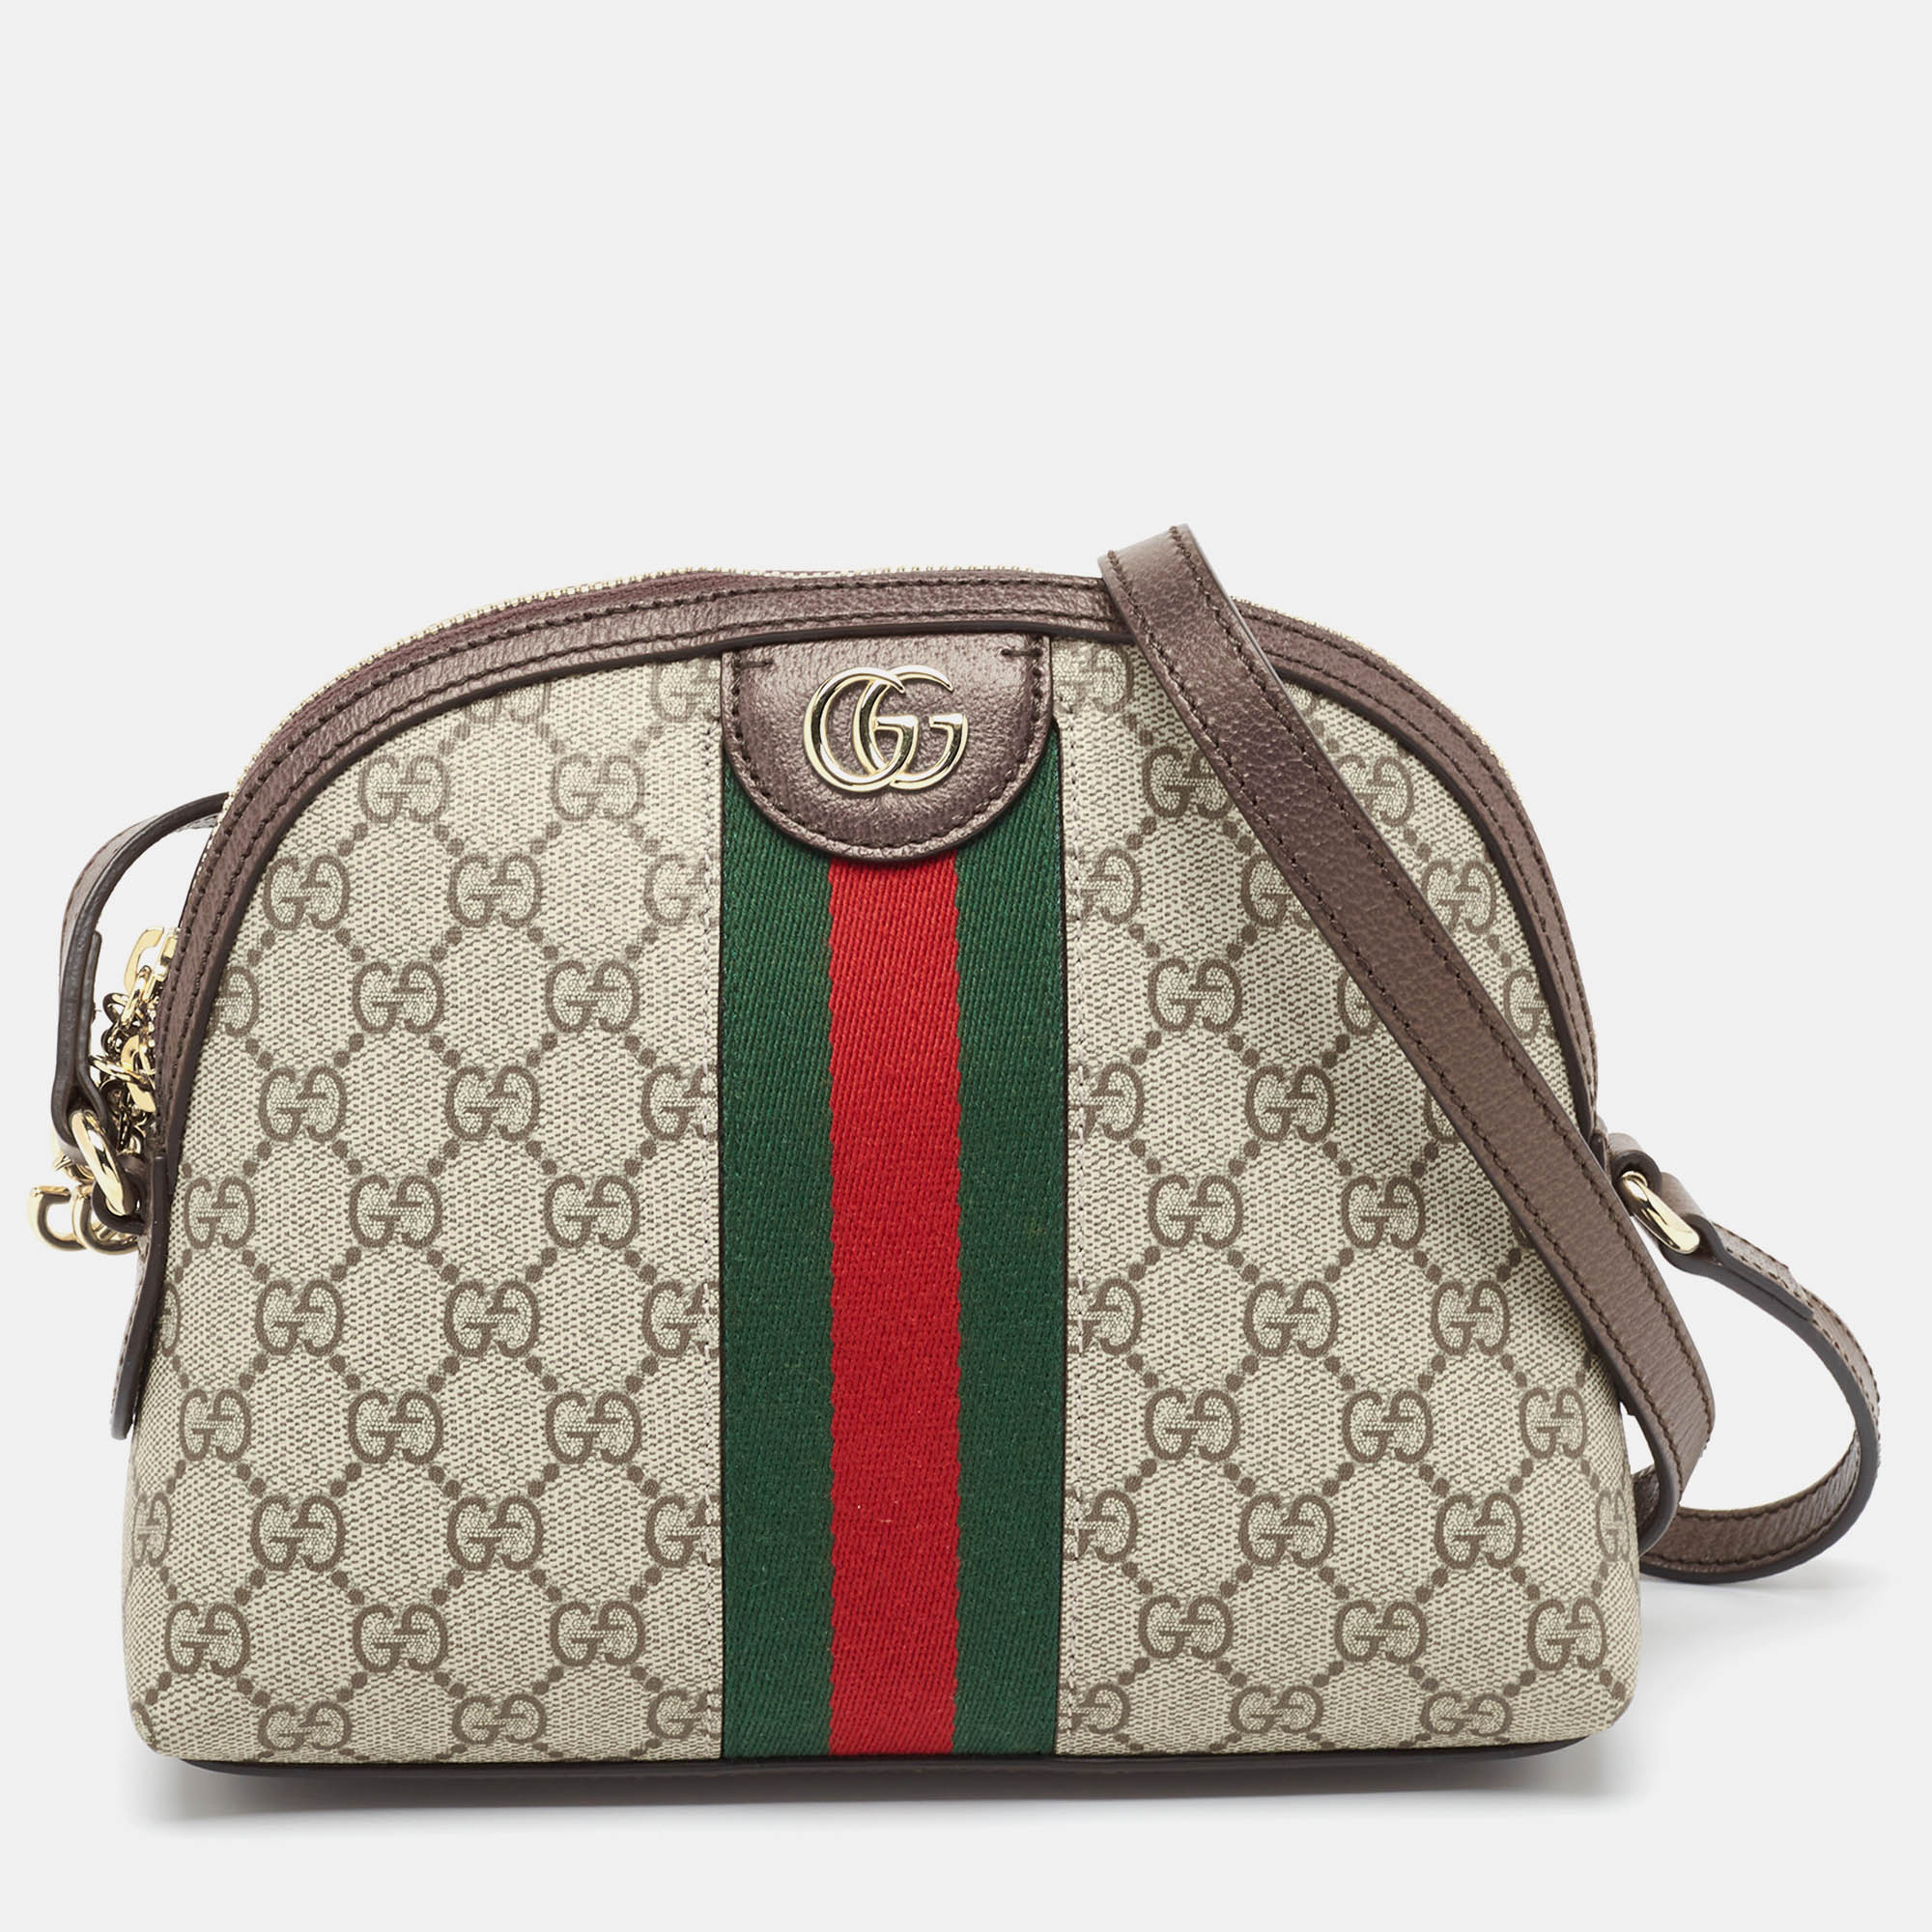 The simple silhouette and the use of durable materials for the exterior bring out the appeal of this Gucci shoulder bag for women. It features a long strap and a well lined interior.